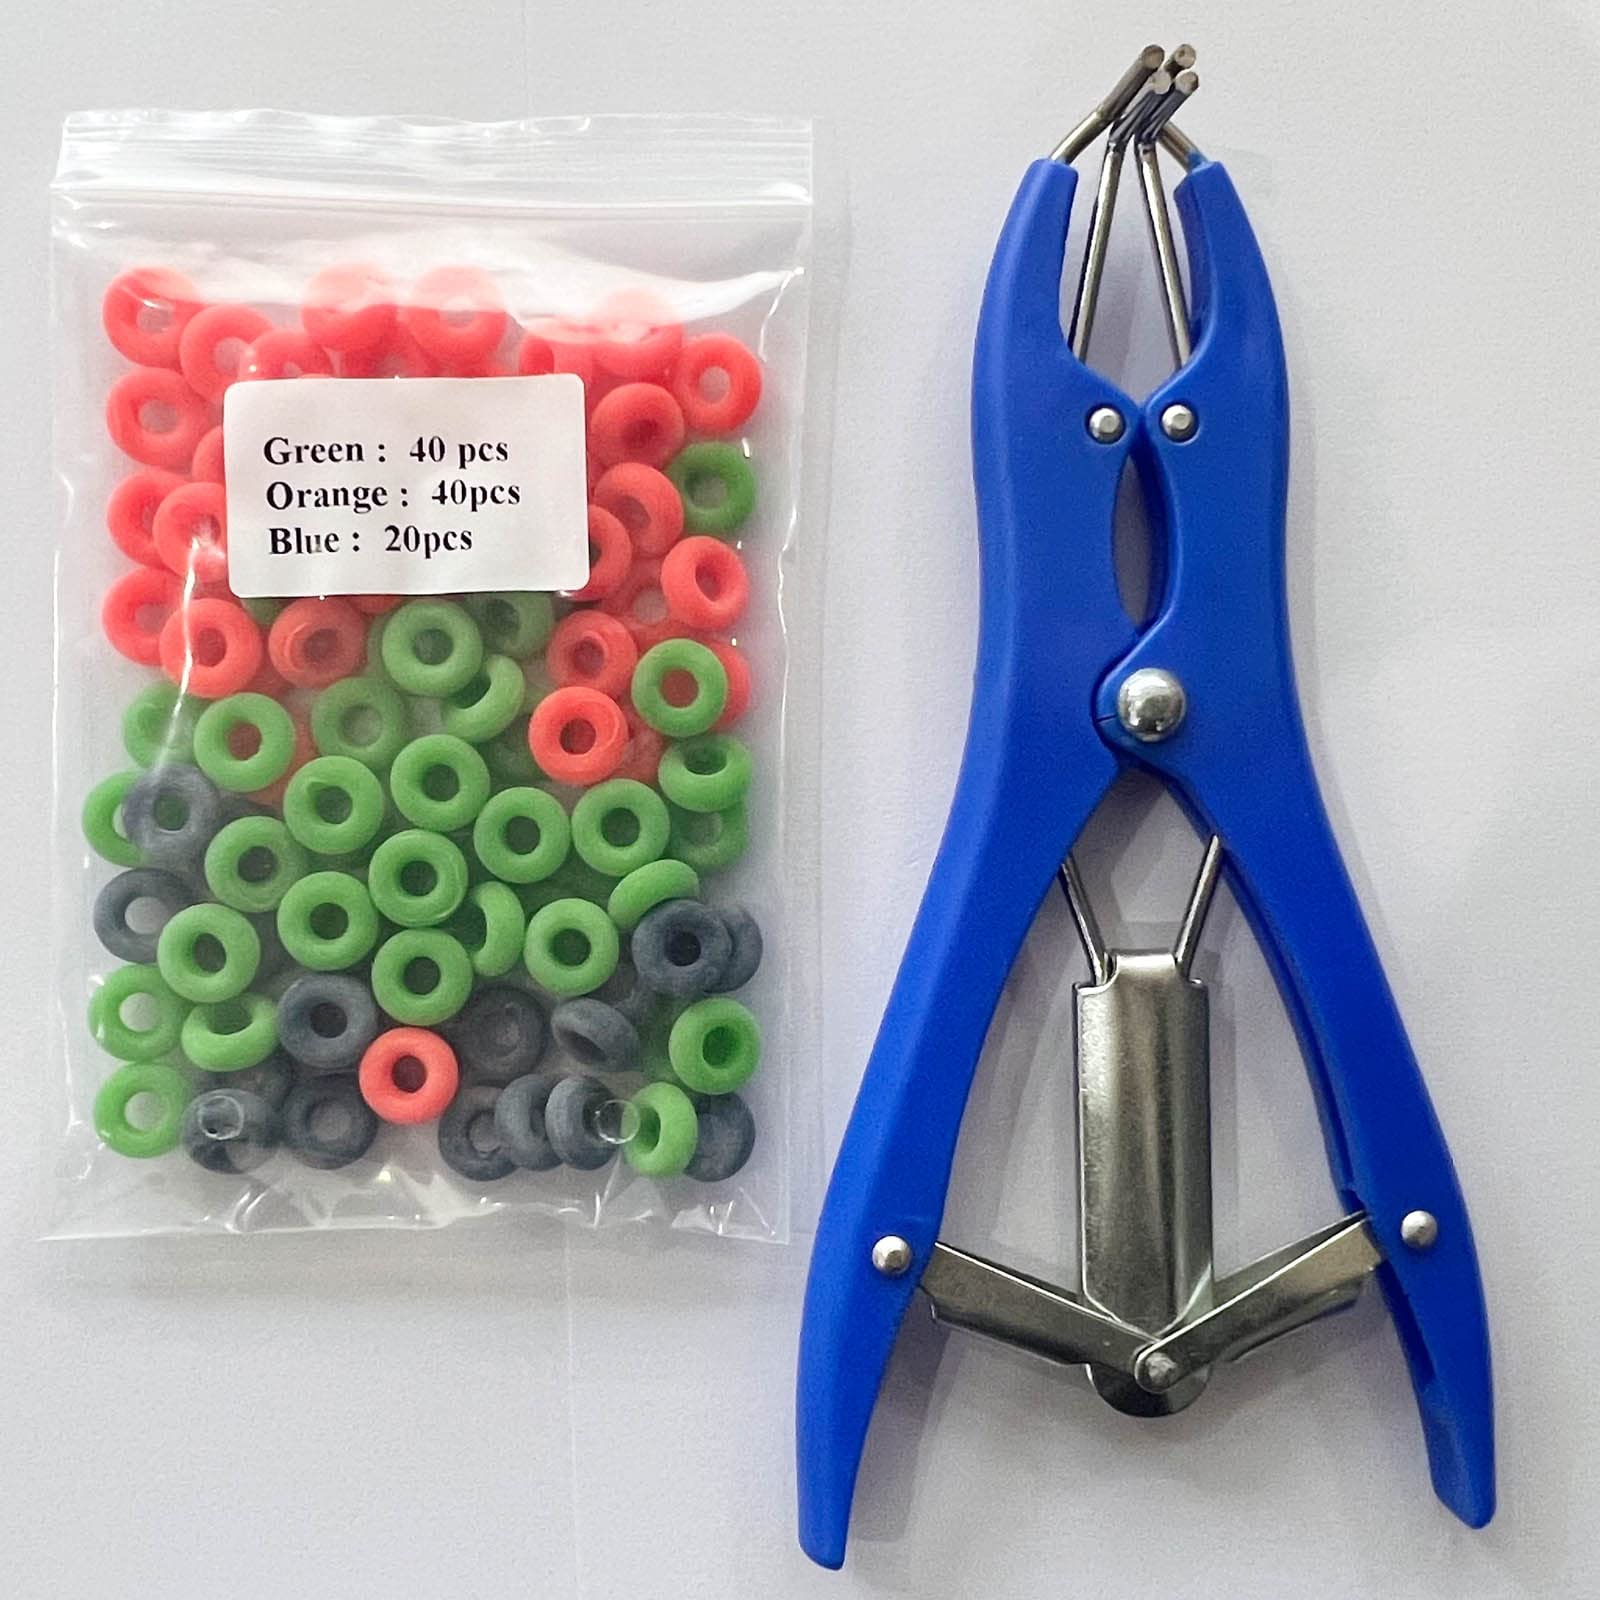 RANCH CHOICE Castration Bander Castration Tool (with 100pcs Bands, Blue Orange and Green Color)